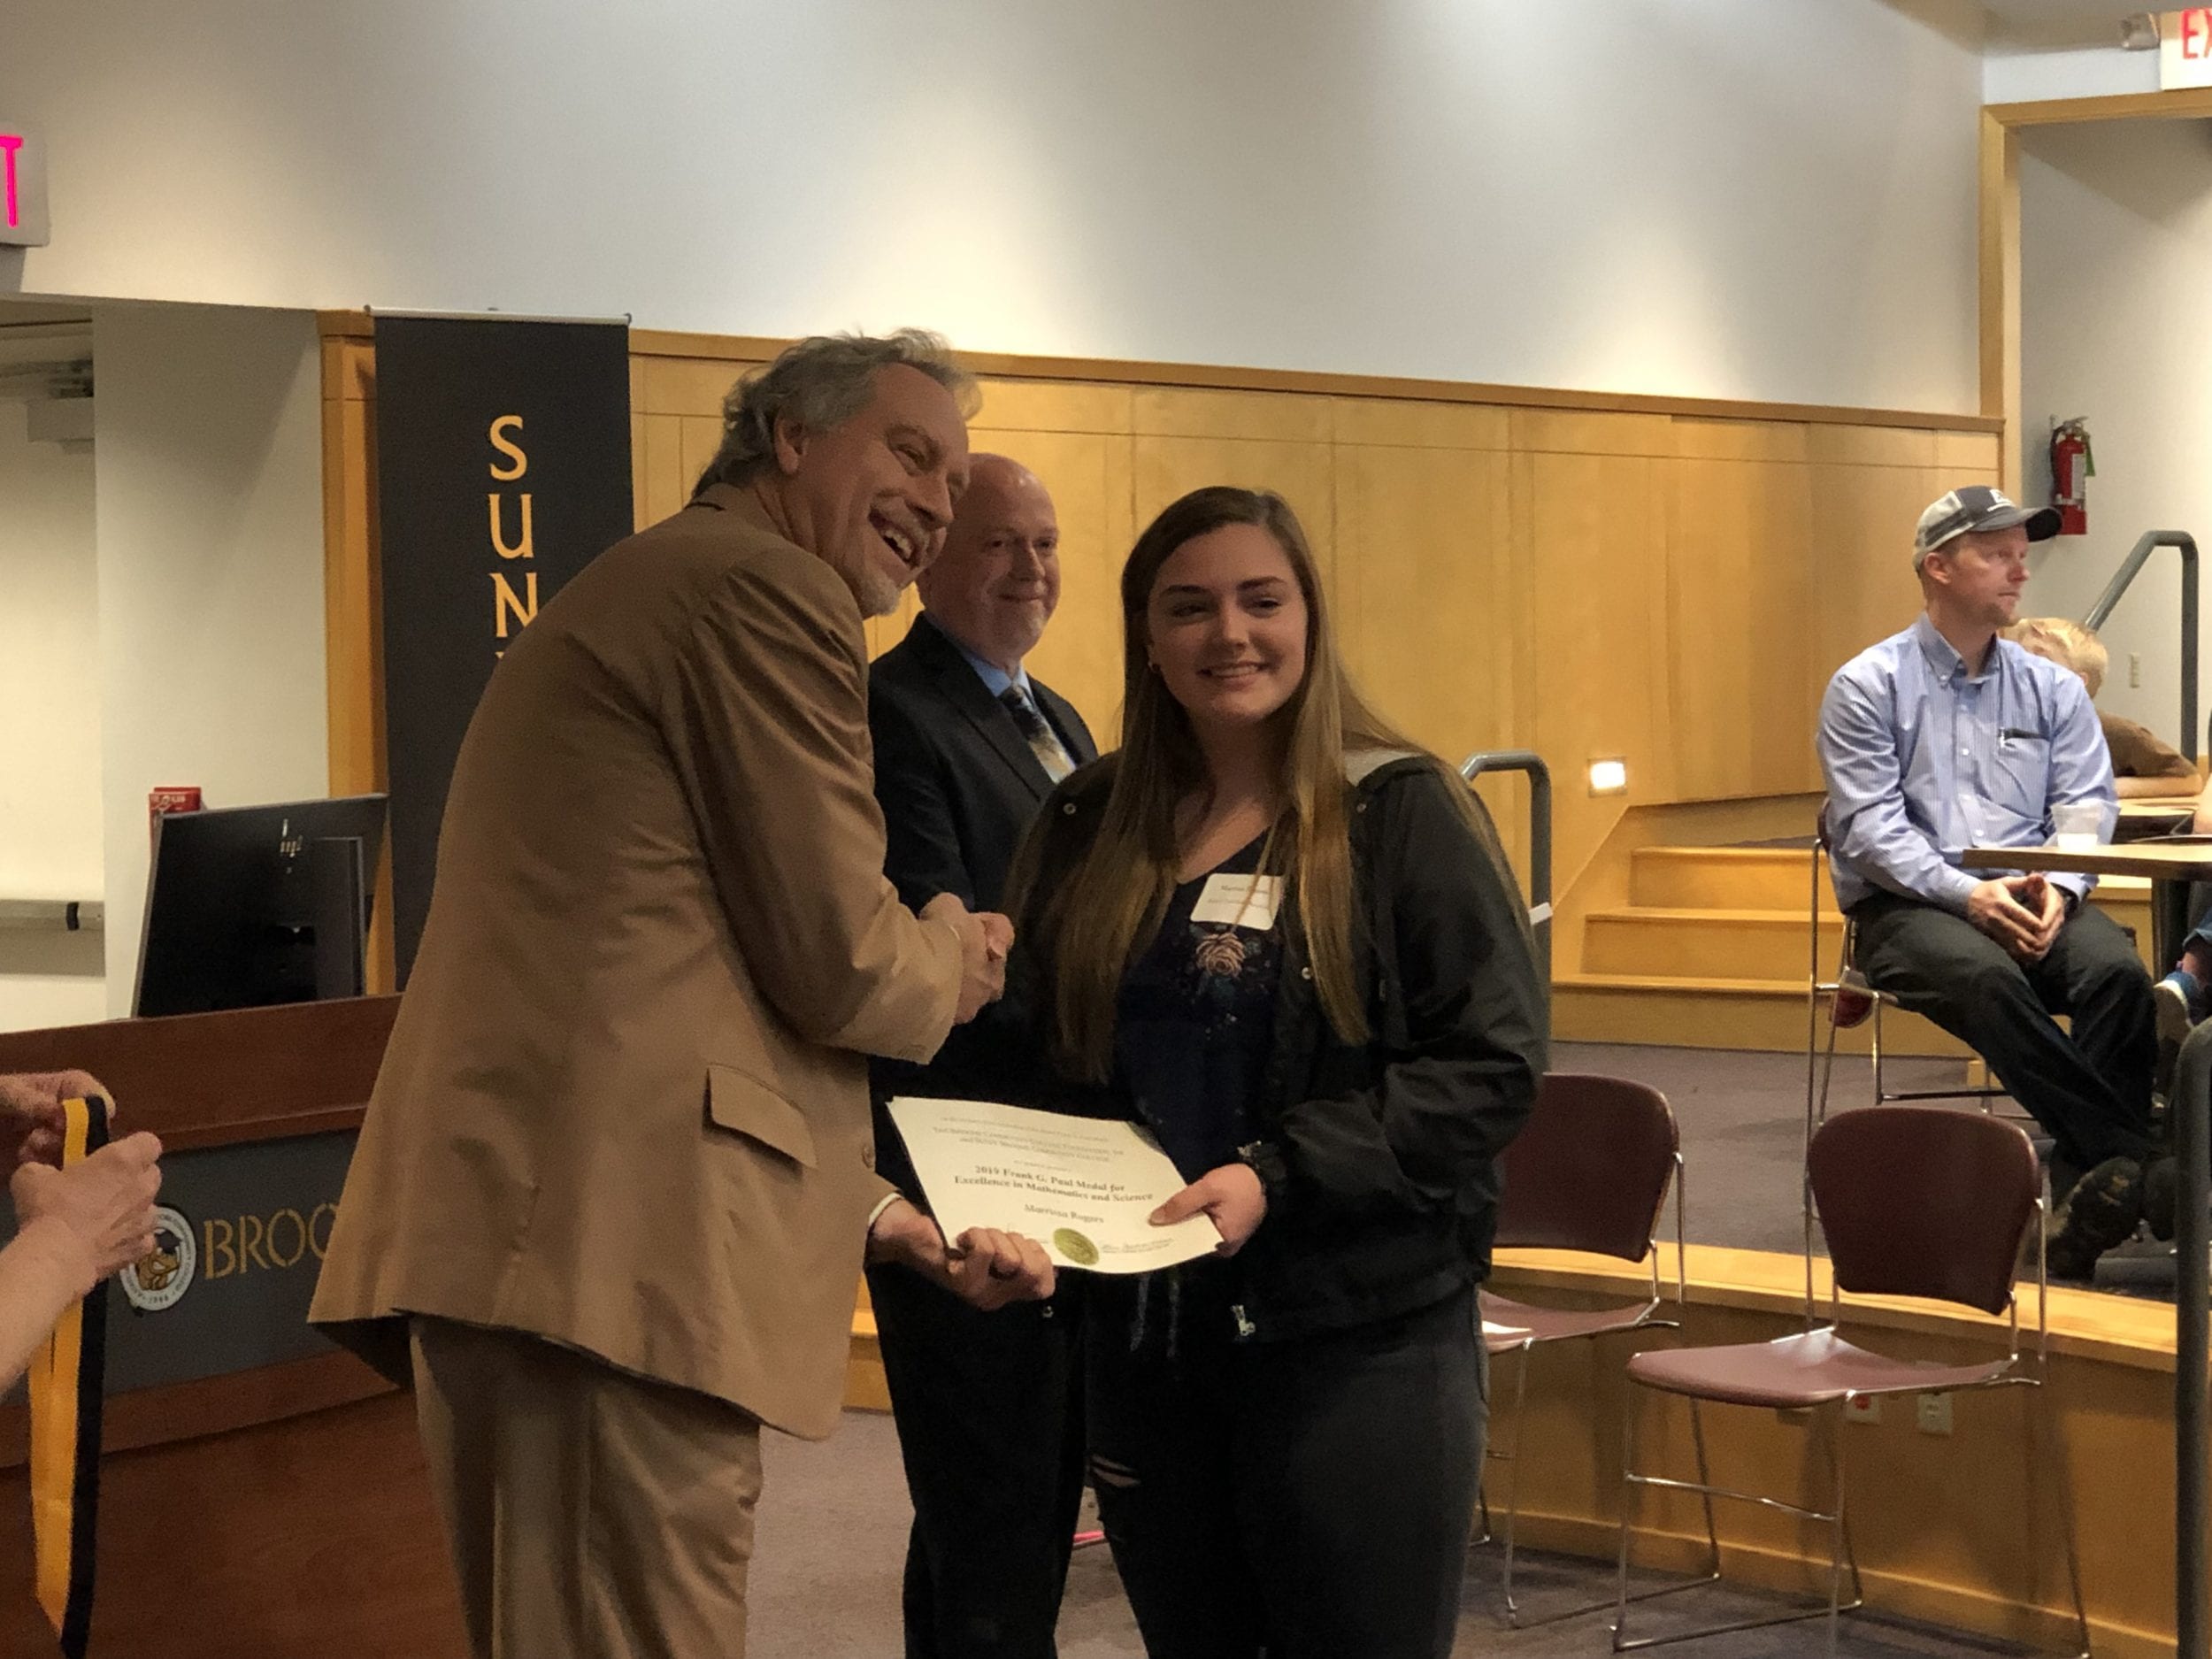 Marrissa Rogers receives the Frank G. Paul award from SUNY Broome President Kevin E. Drumm